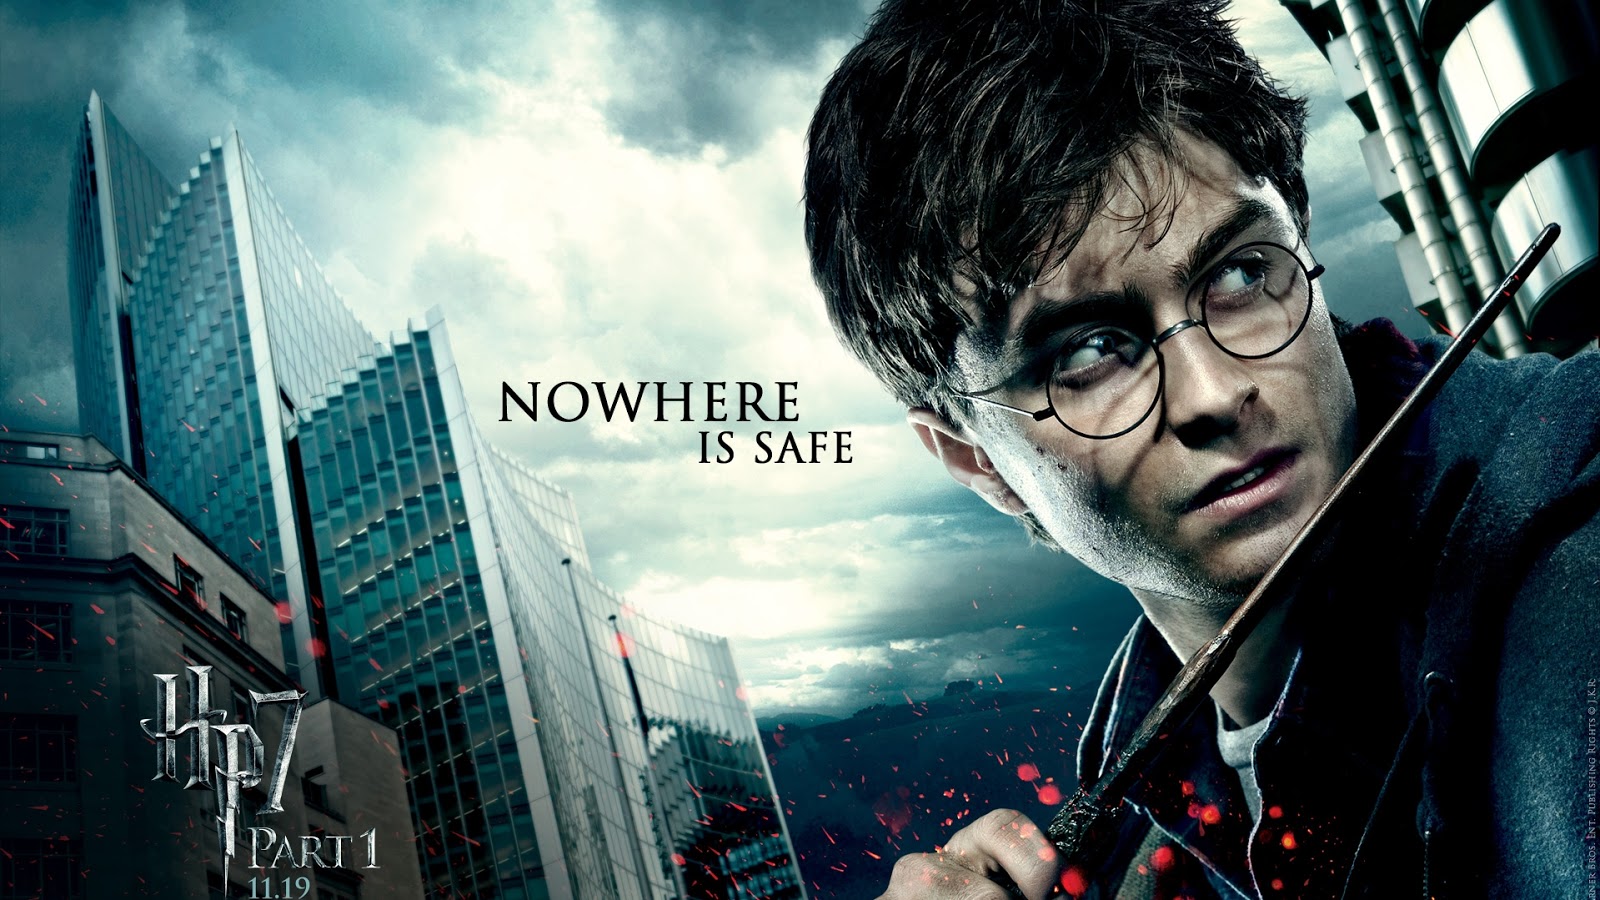 harry potter part 4 hd movie download in hindi